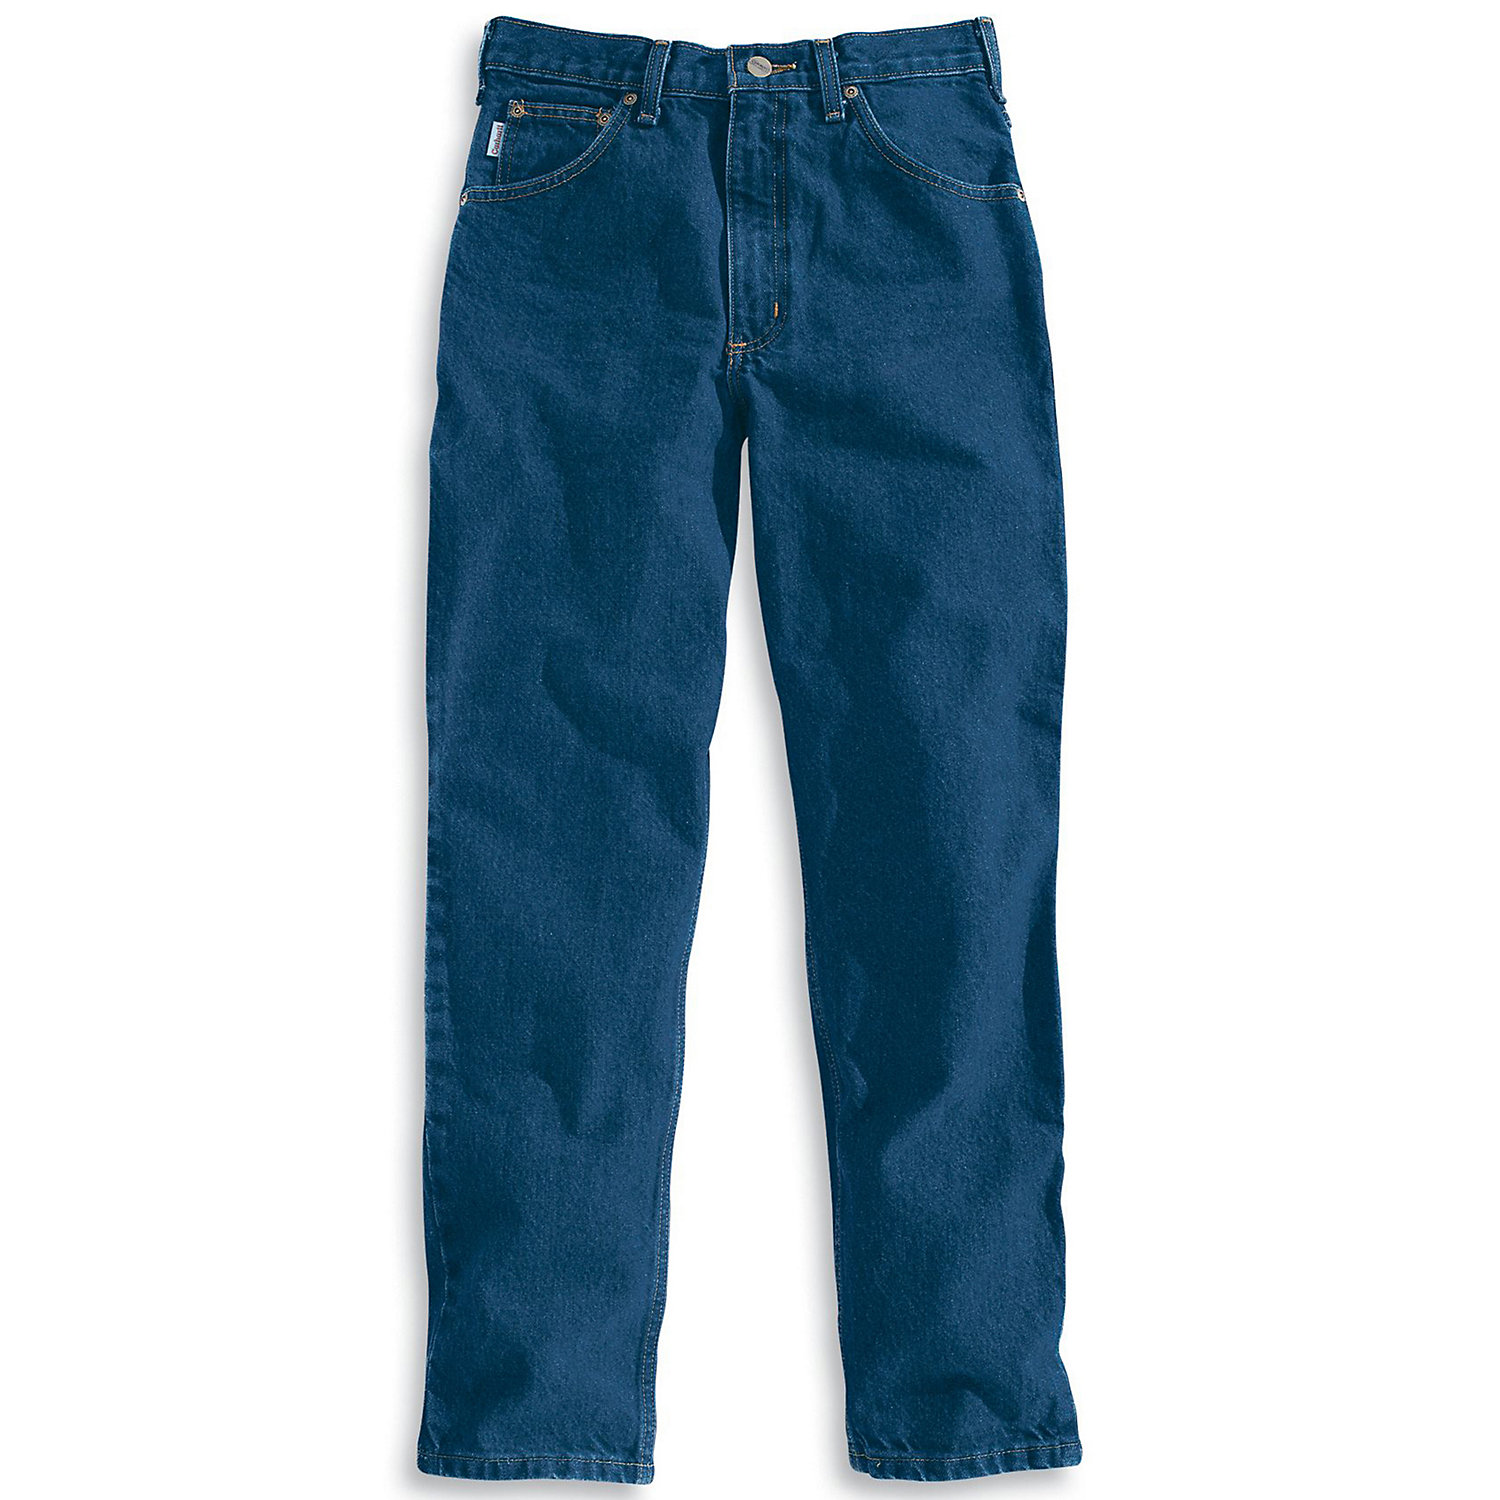 Carhartt Mens Relaxed Fit Tapered Leg Jean